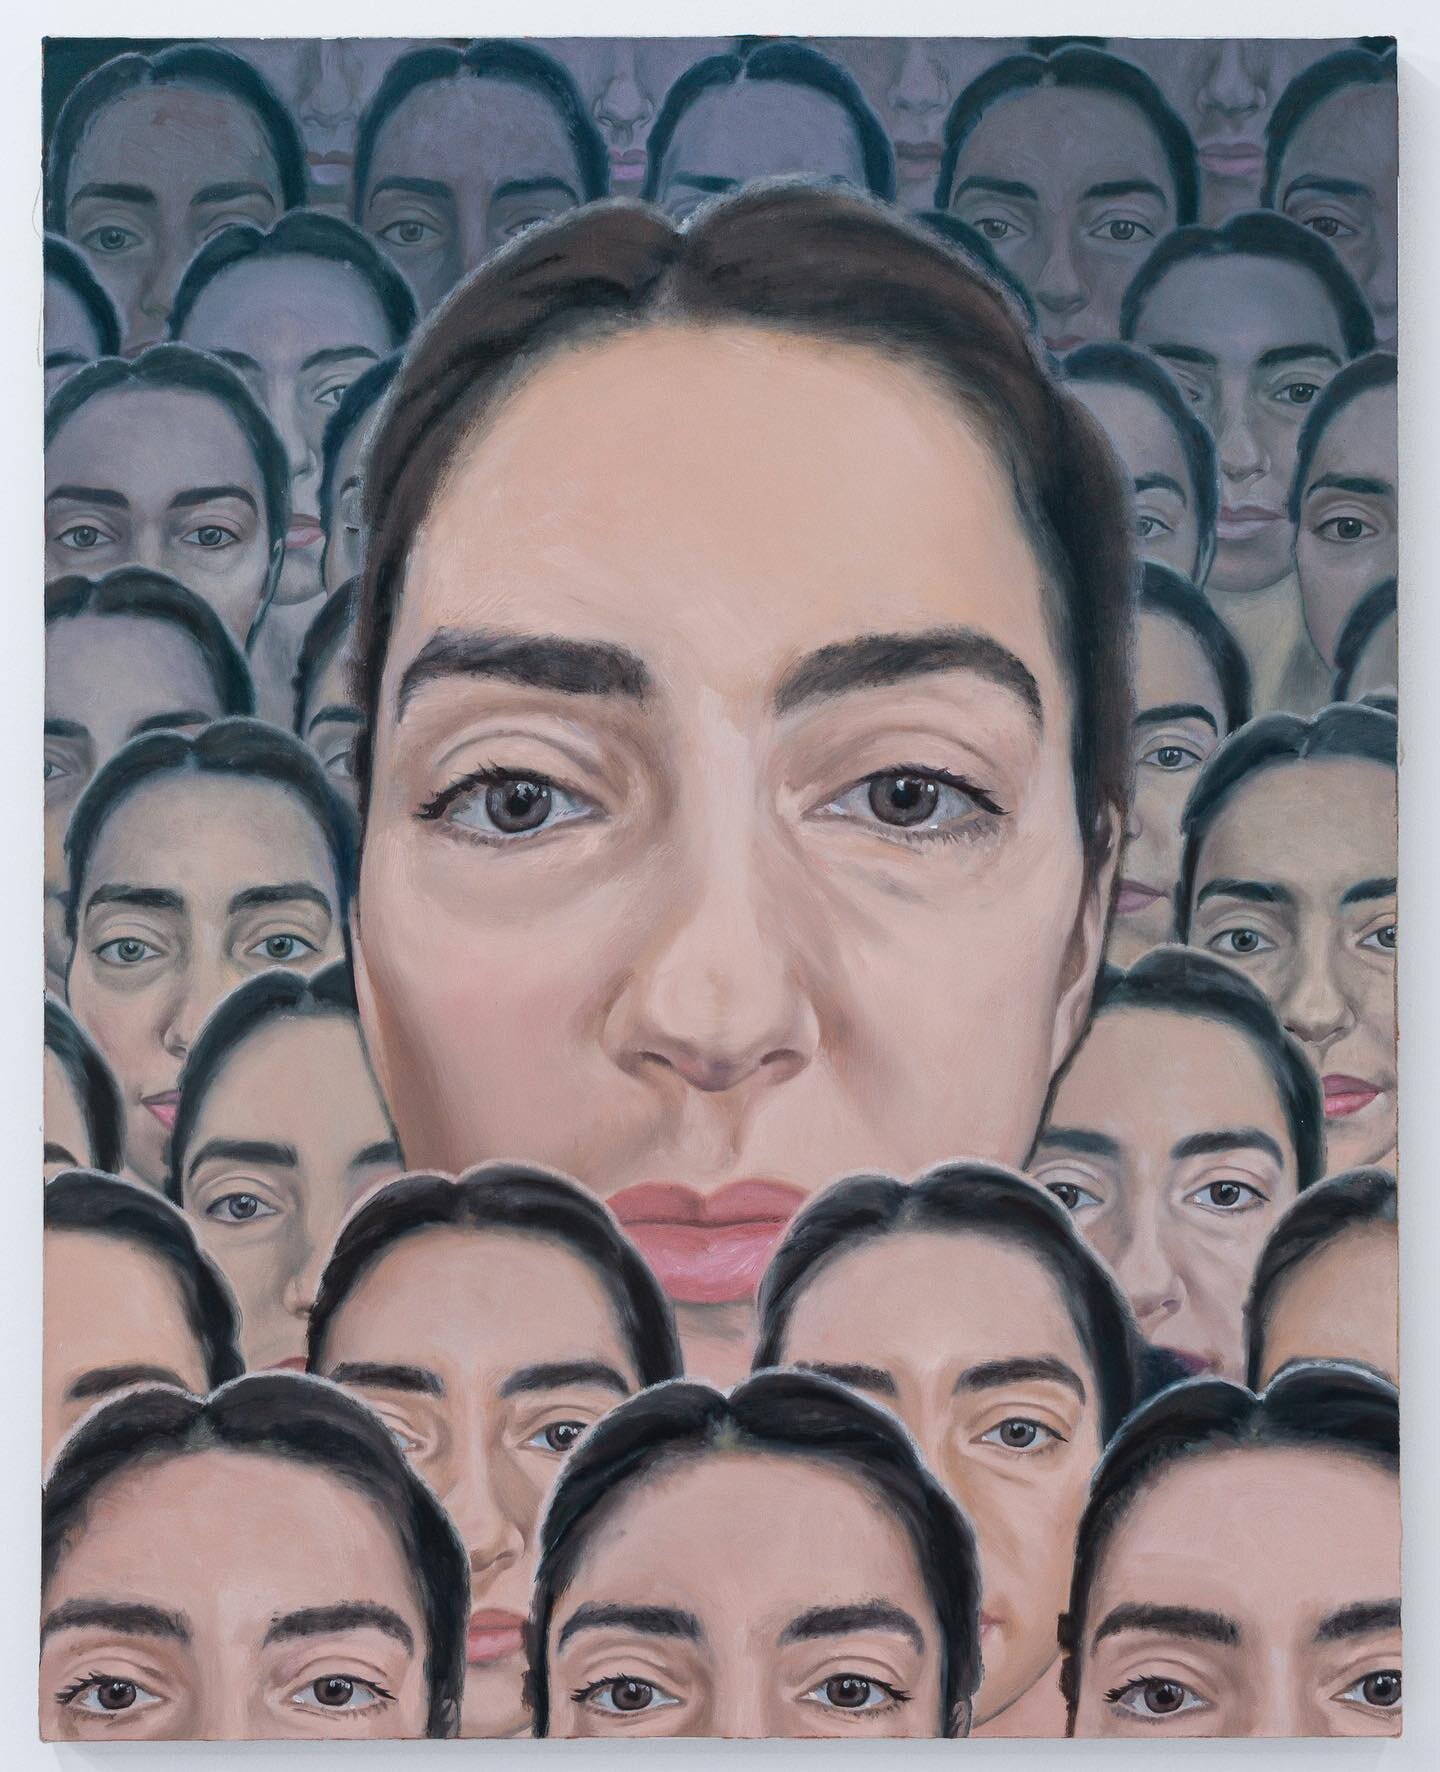 New year, same Iz! 👩🏻&zwj;🎨

This is 👥 Selfie Army ⚔️😈
oil on canvas, 38 x 30 inches

From my solo show last fall @belleisleviewingroom 

🪞Mirror, Mirror🪞
Sept 24 - Nov 5, 2022

#selfportrait #oiloncanvas